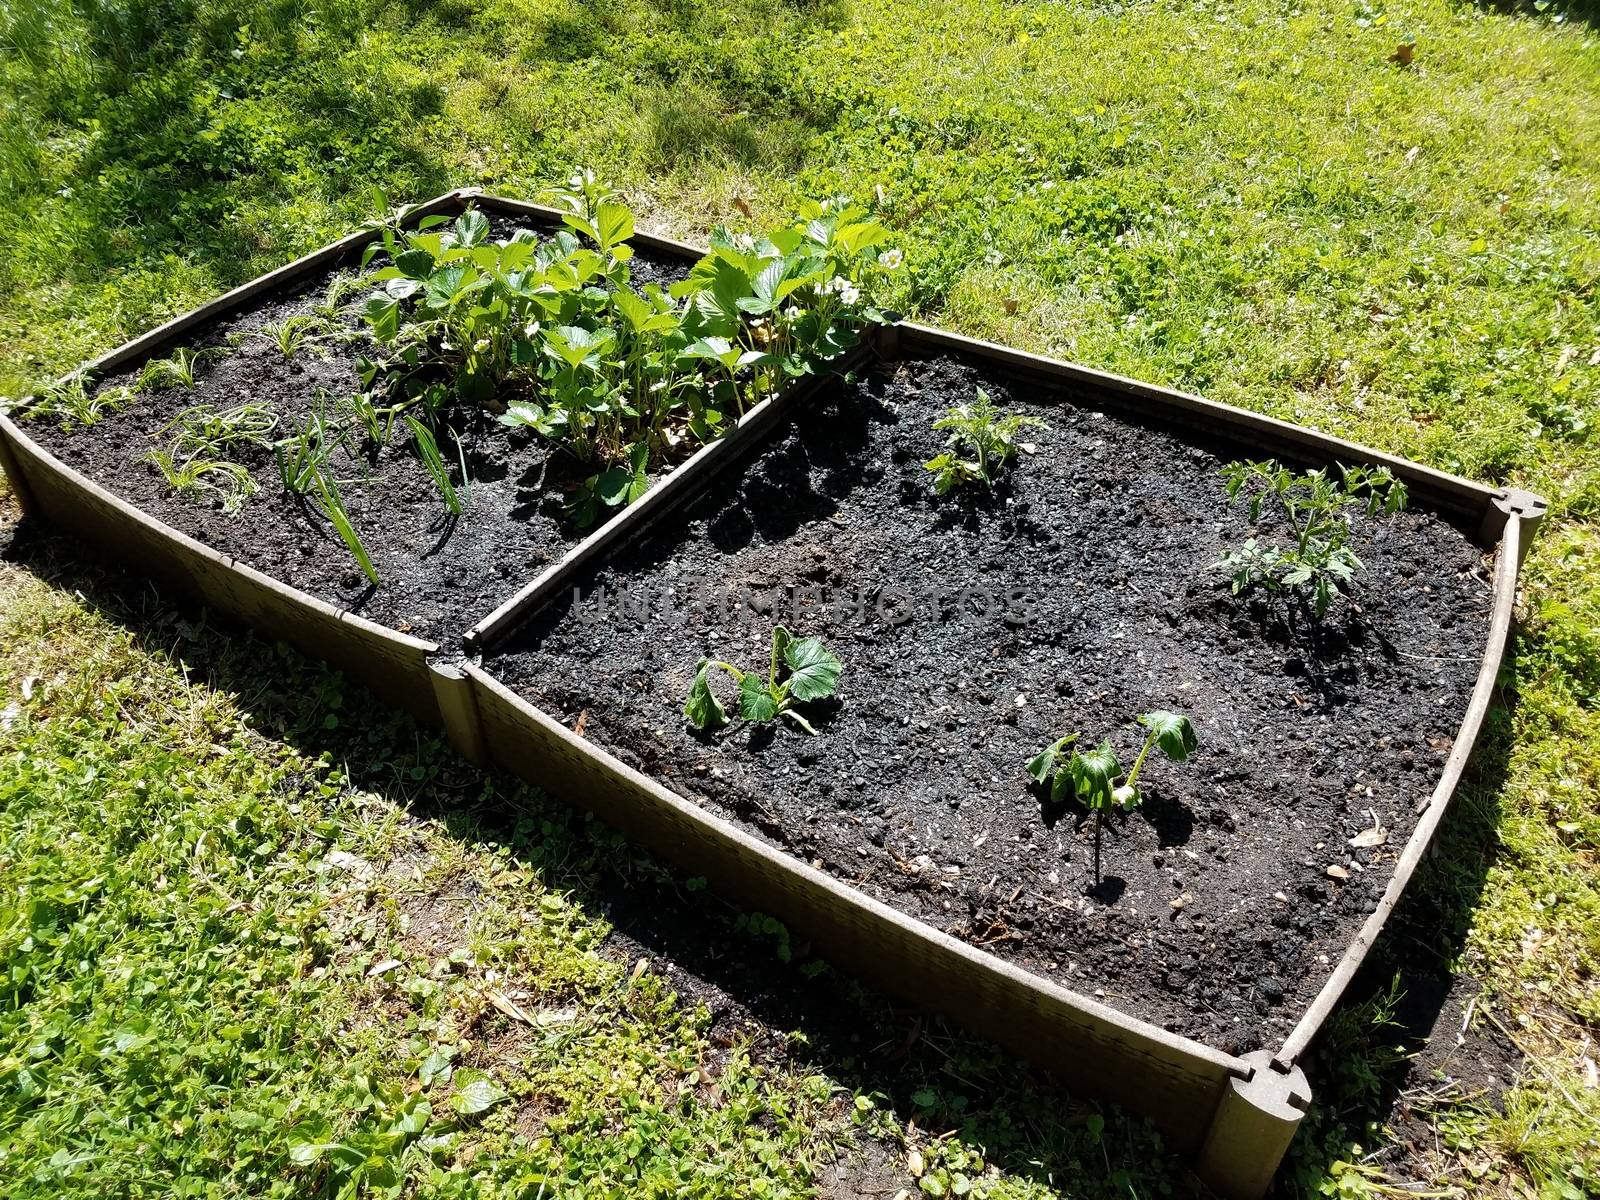 garden with strawberry, tomato, onion, carrot, and squash plants and soil